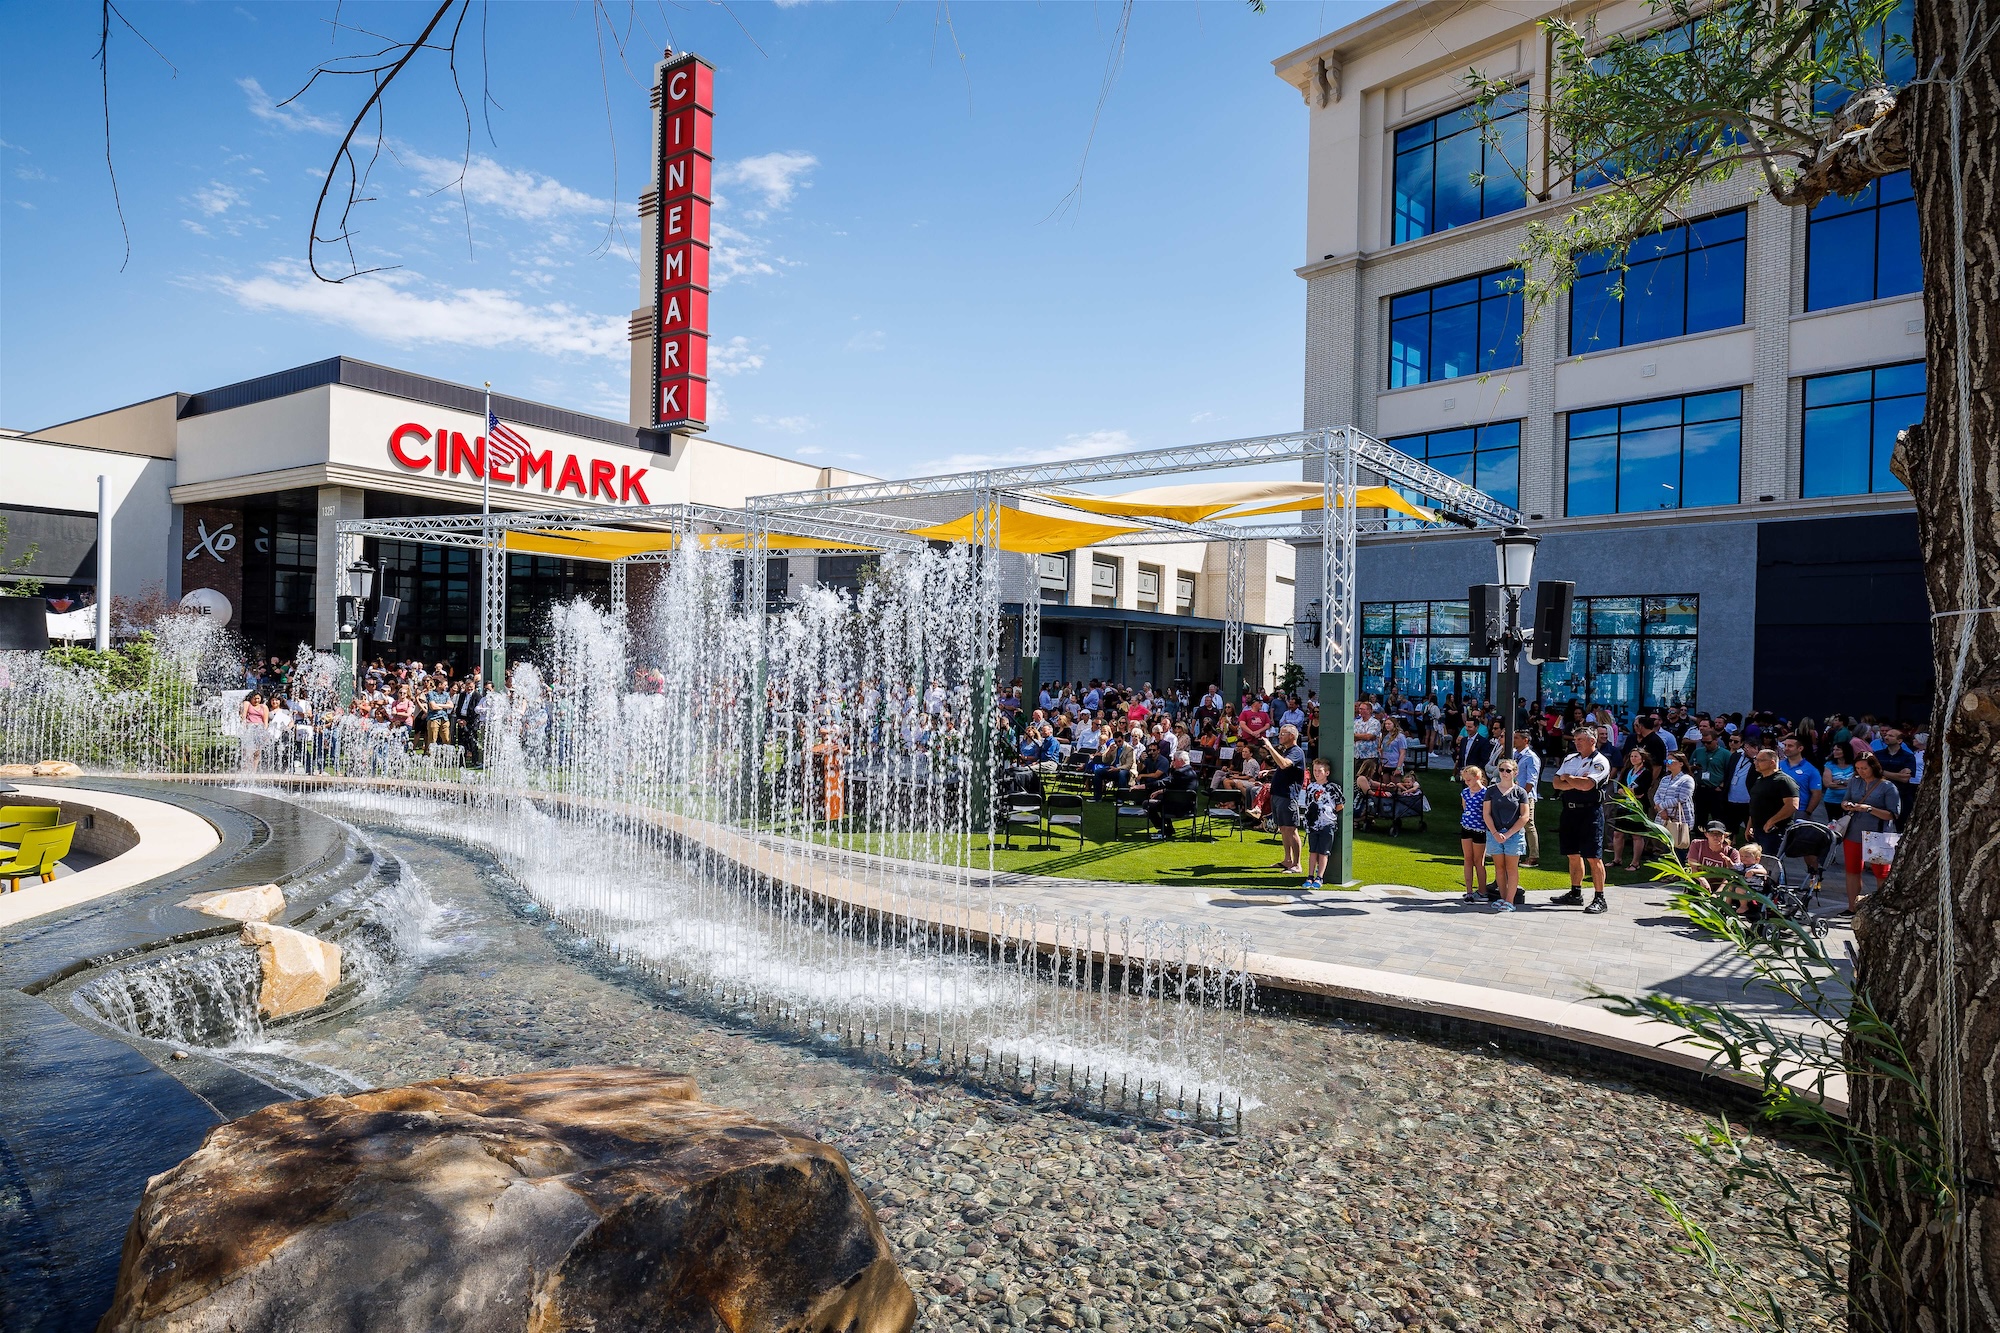 The AO-designed Mountain View Village in Utah has a water feature that’s controlled by an AI-assisted system, developed by Outside The Lines, that is capable of responding to different crowd movements. Photo courtesy Outside The Lines